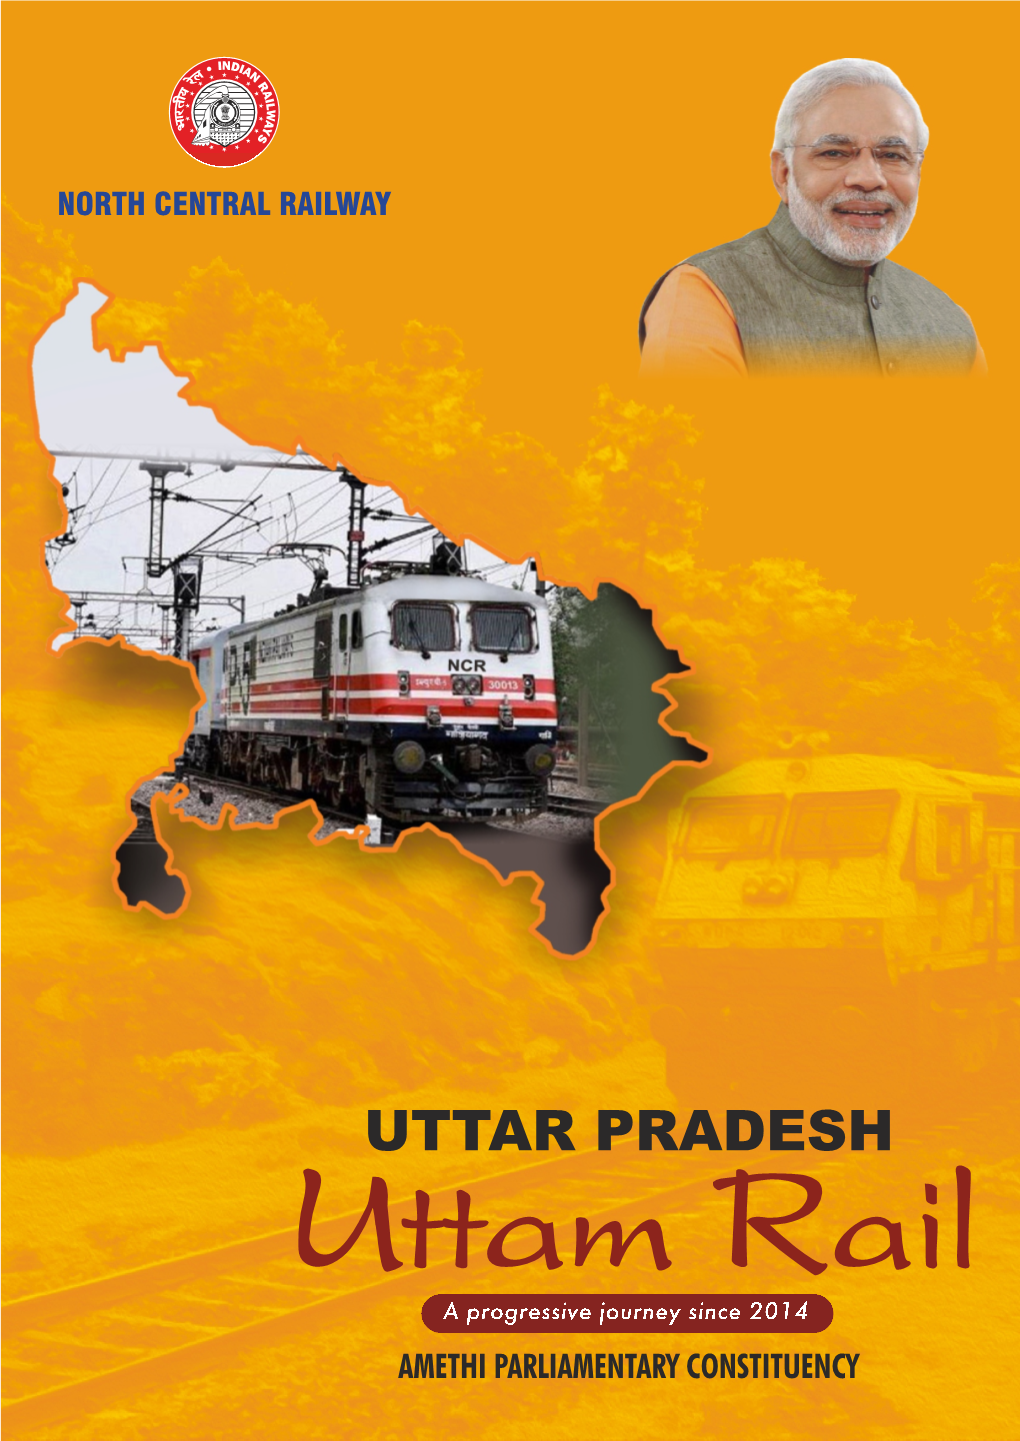 AMETHI PARLIAMENTARY CONSTITUENCY Uttar Pradesh, the Most Populous State of Nation Is Served by North Central Railway Along with Northern, North Eastern M